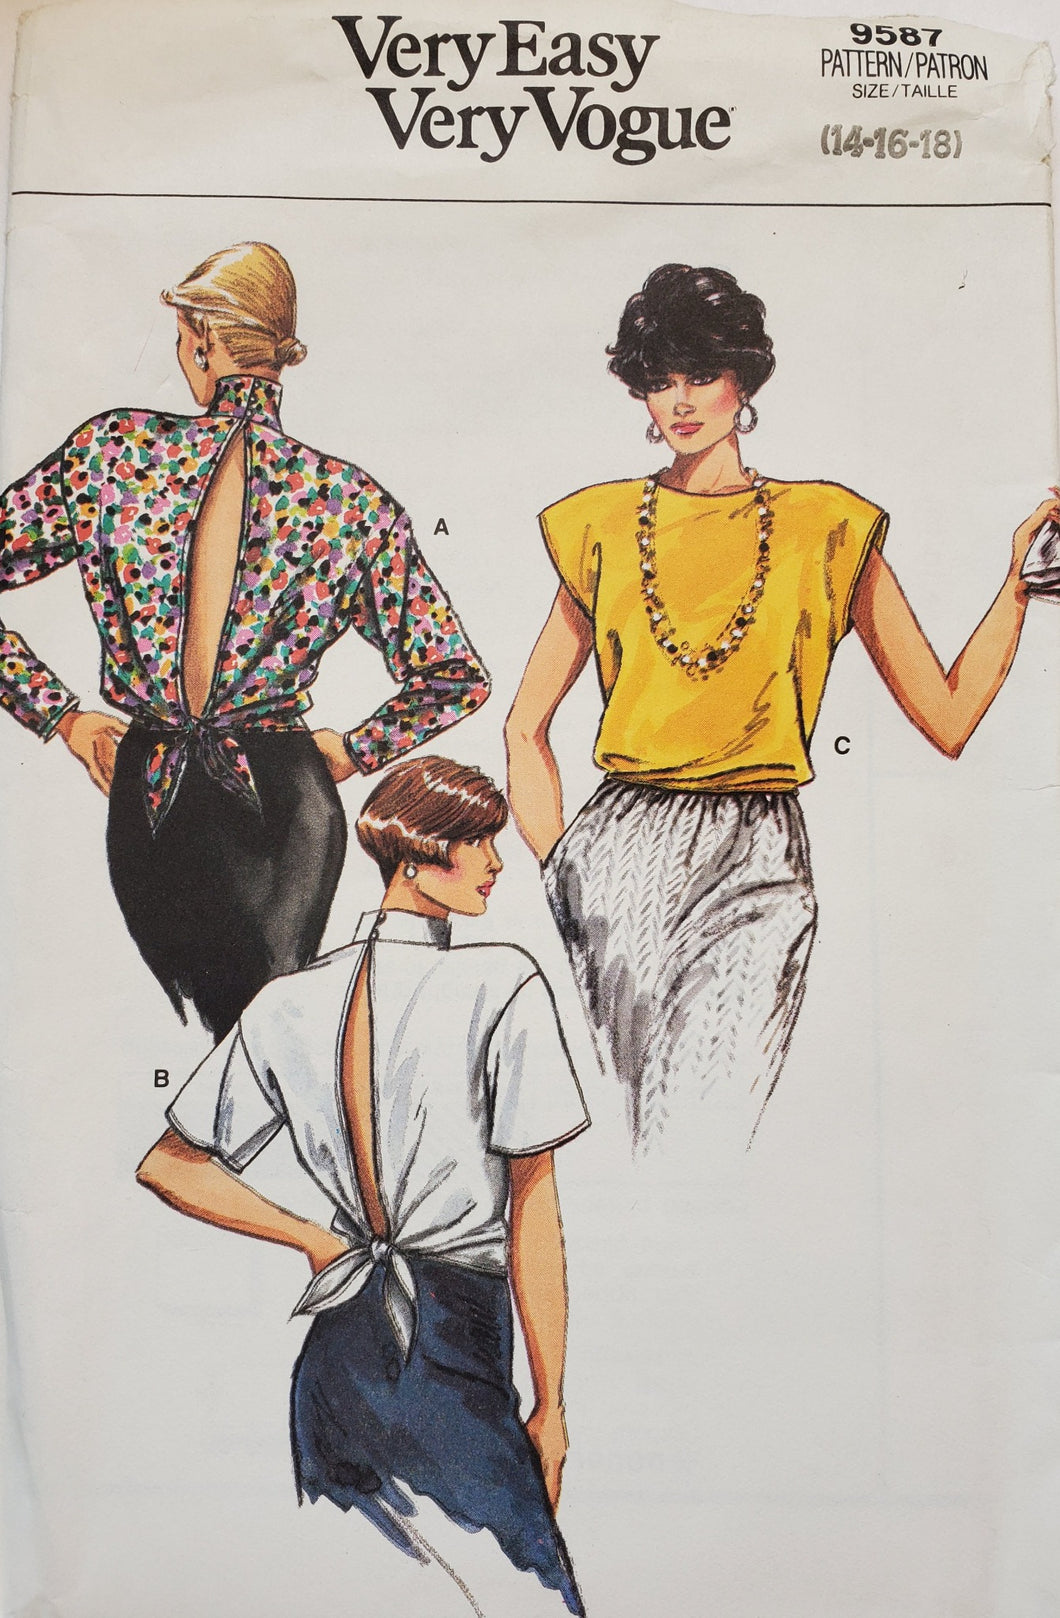 Vogue Pattern 9587, UNCUT, Vogue Tops and Skirts, Size 14-16-18, Vintage & Very Rare